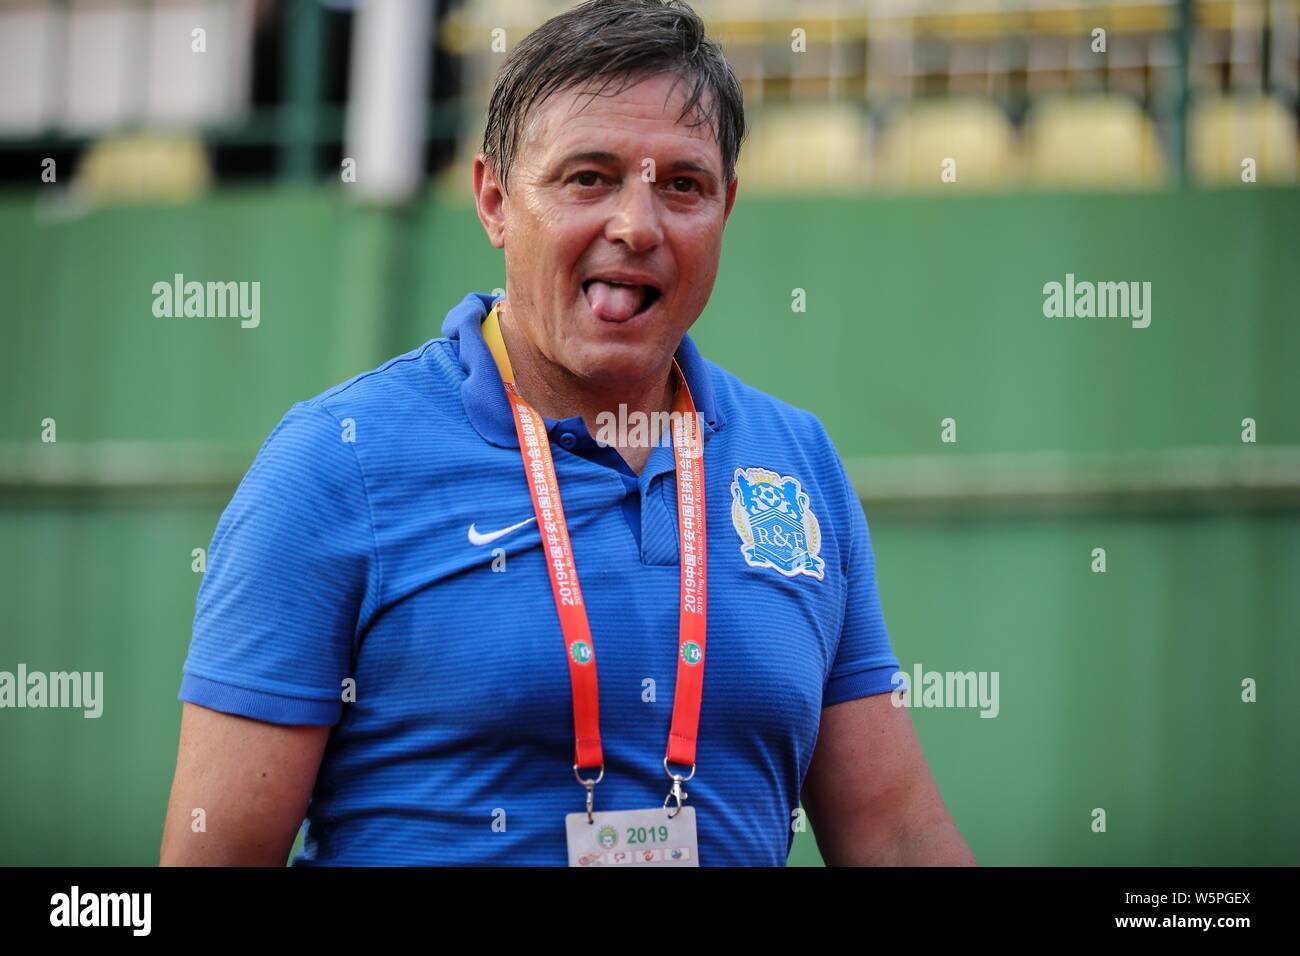 Head coach Dragan Stojkovic of Guangzhou R&F celebrates as he watches his players competing against Beijing Renhe in their 10th round match during the Stock Photo